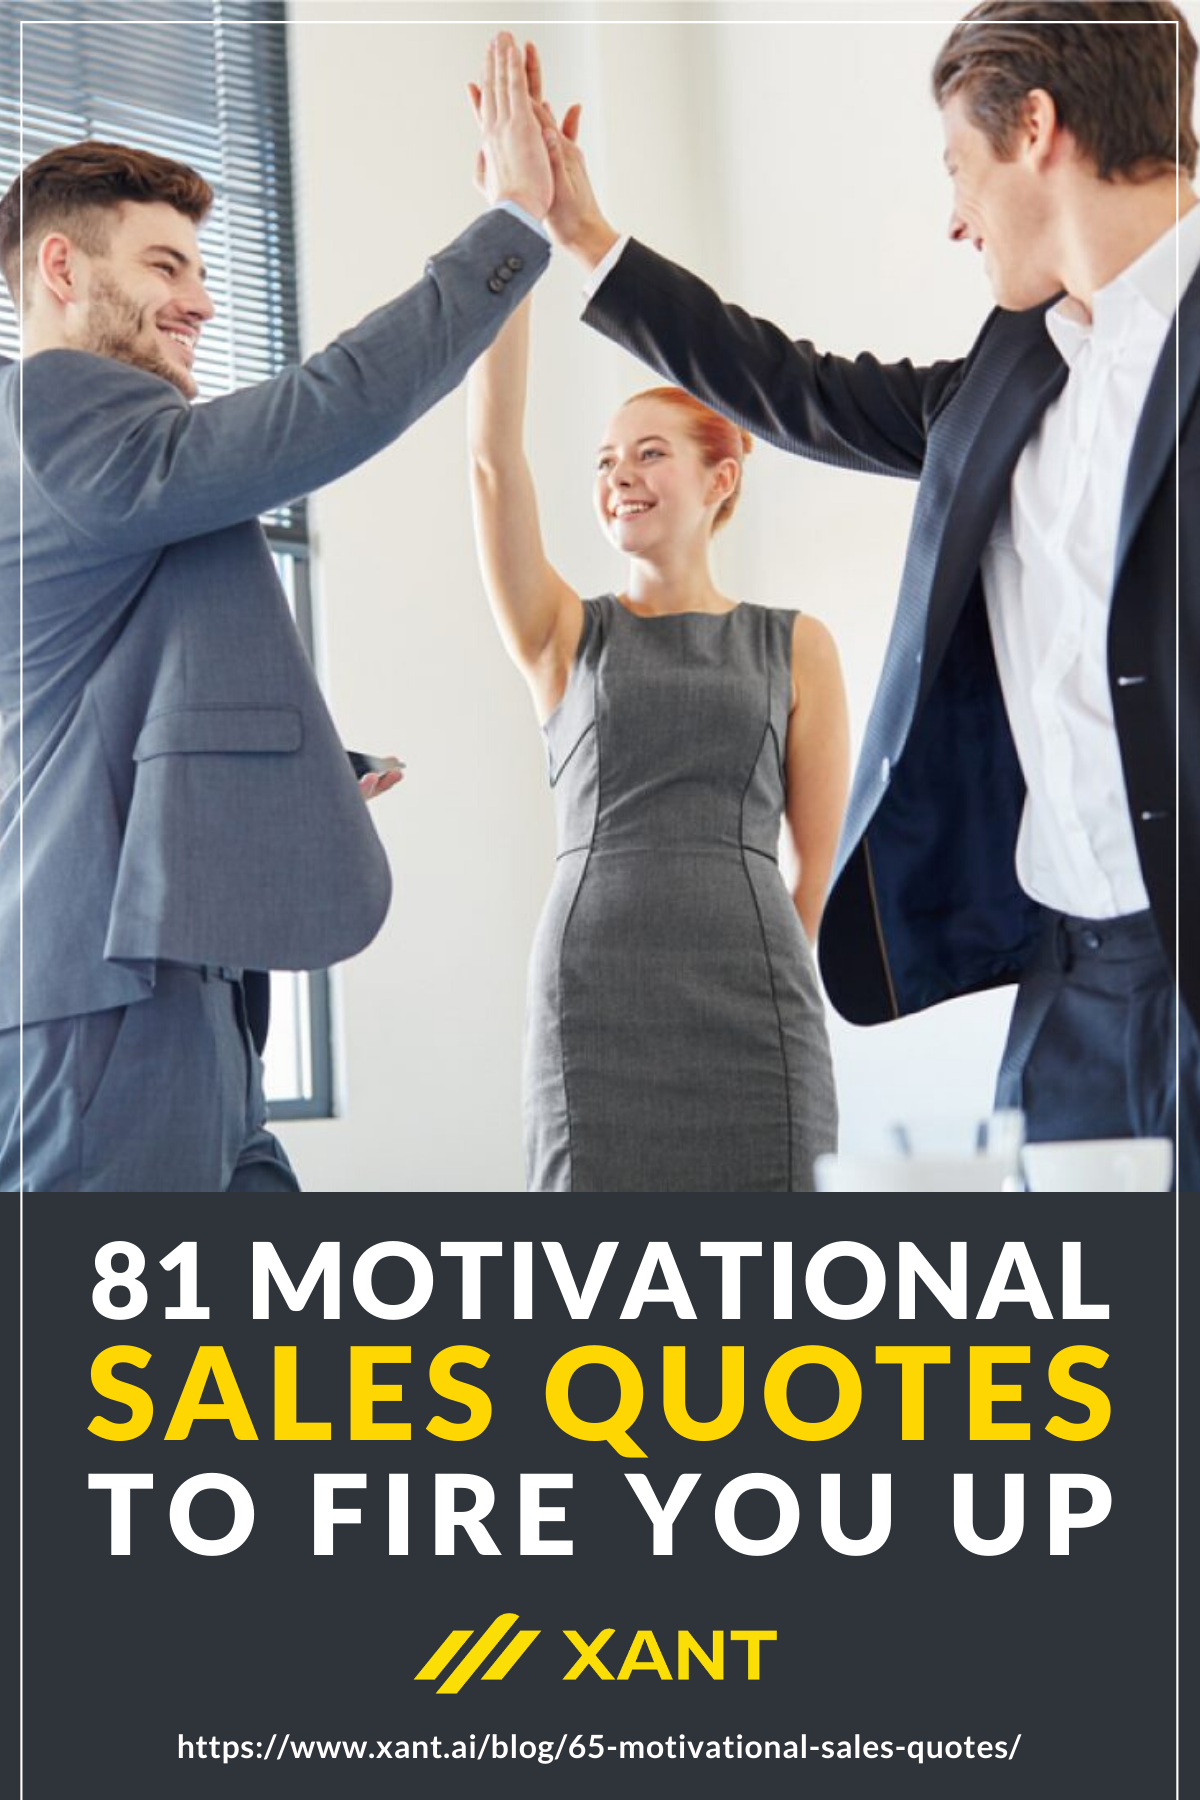 81 Motivational Sales Quotes To Fire You Up [INFOGRAPHIC] | https://www.insidesales.com/blog/65-motivational-sales-quotes/